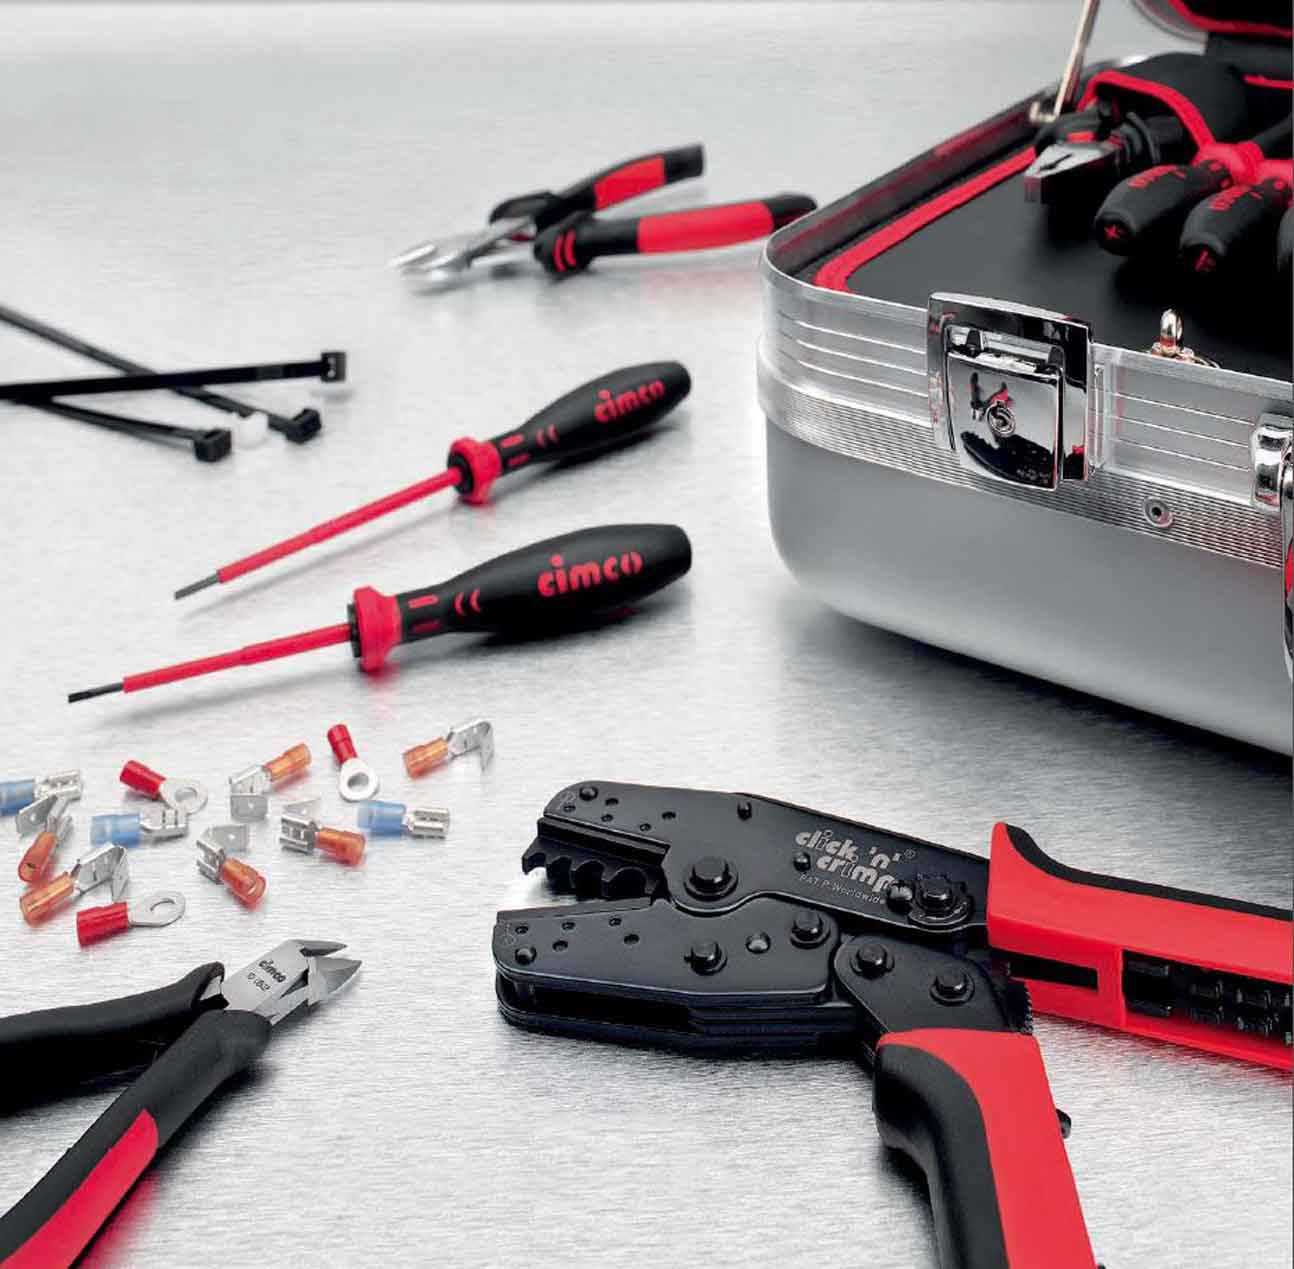 New German Quality Hand Tools from CIMCO